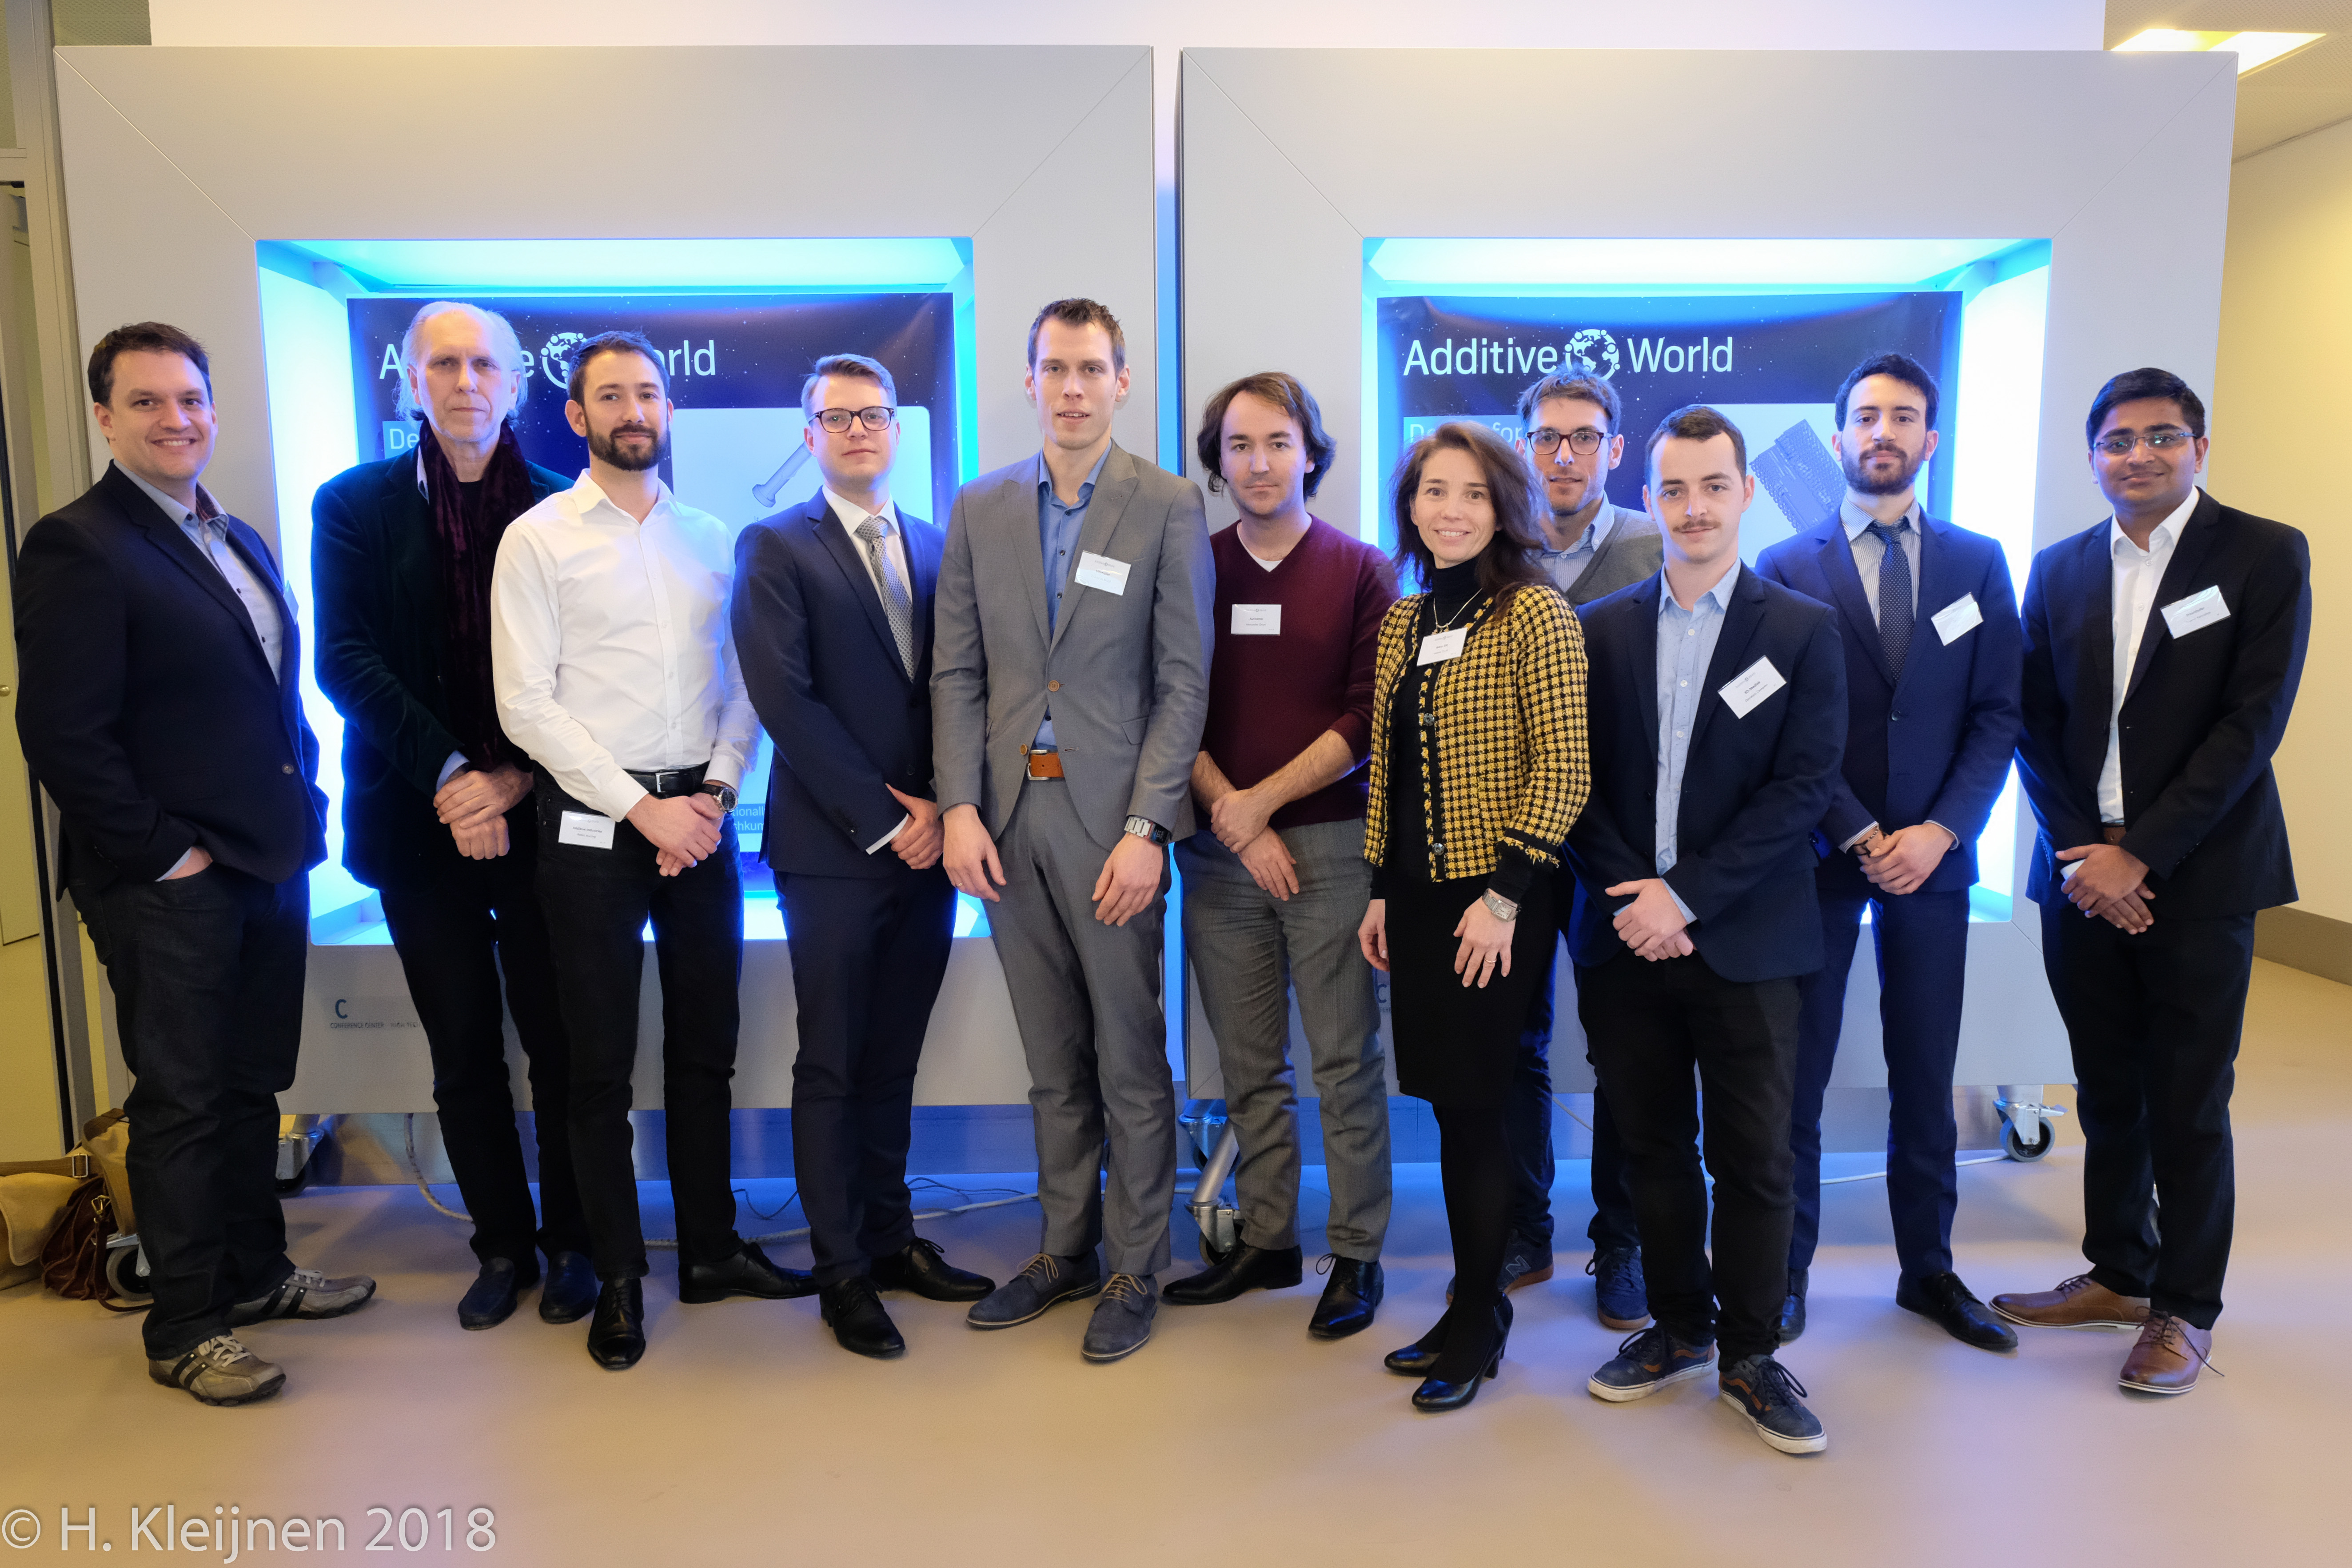 Students and professional winners of the Additive World Design awards.